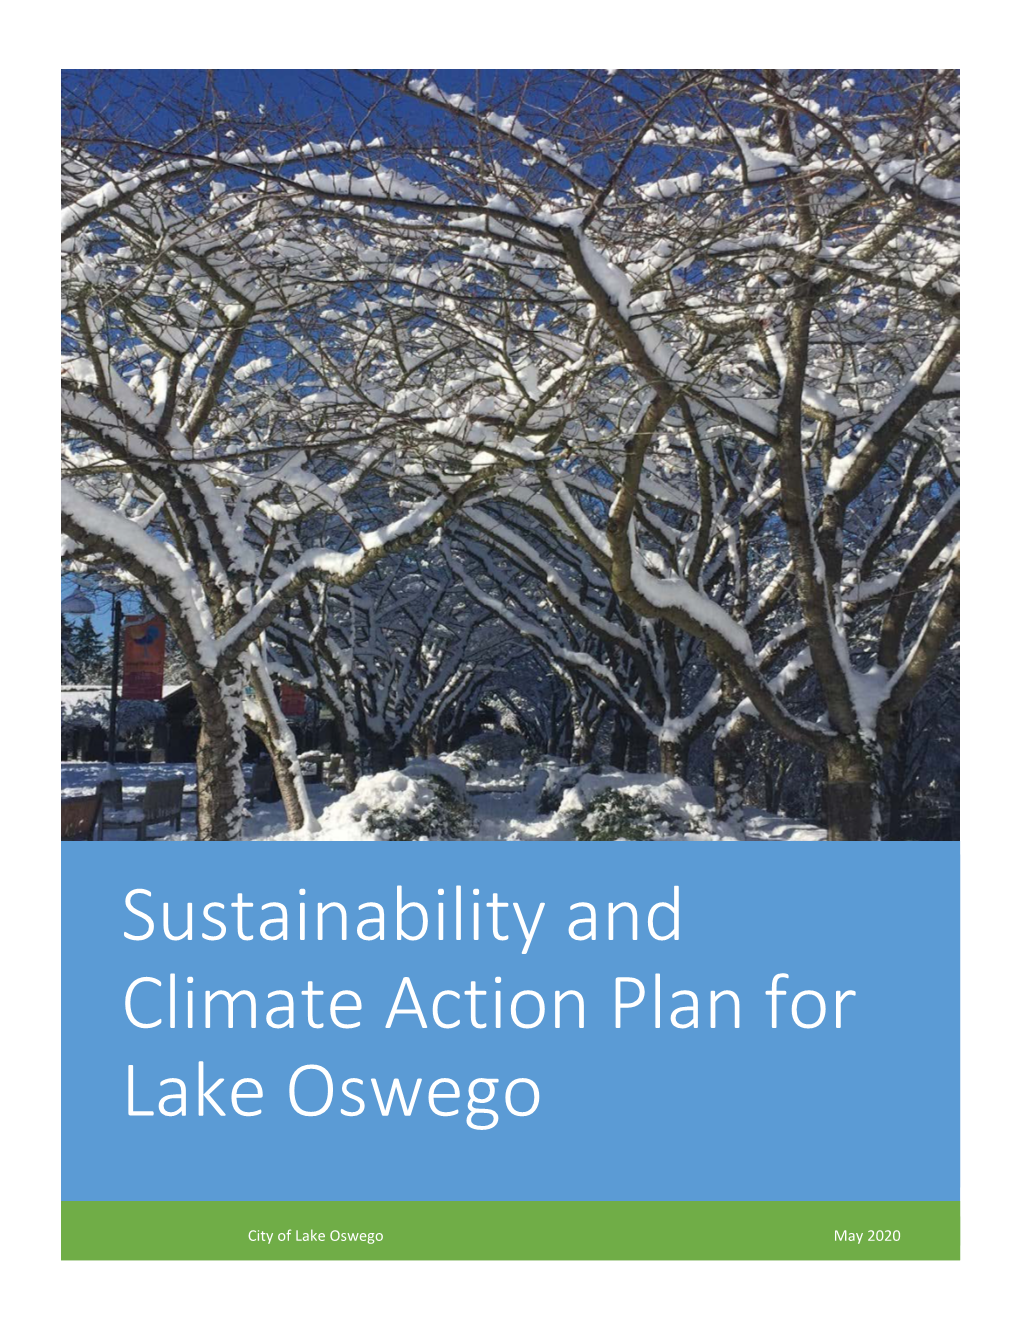 Sustainability and Climate Action Plan for Lake Oswego